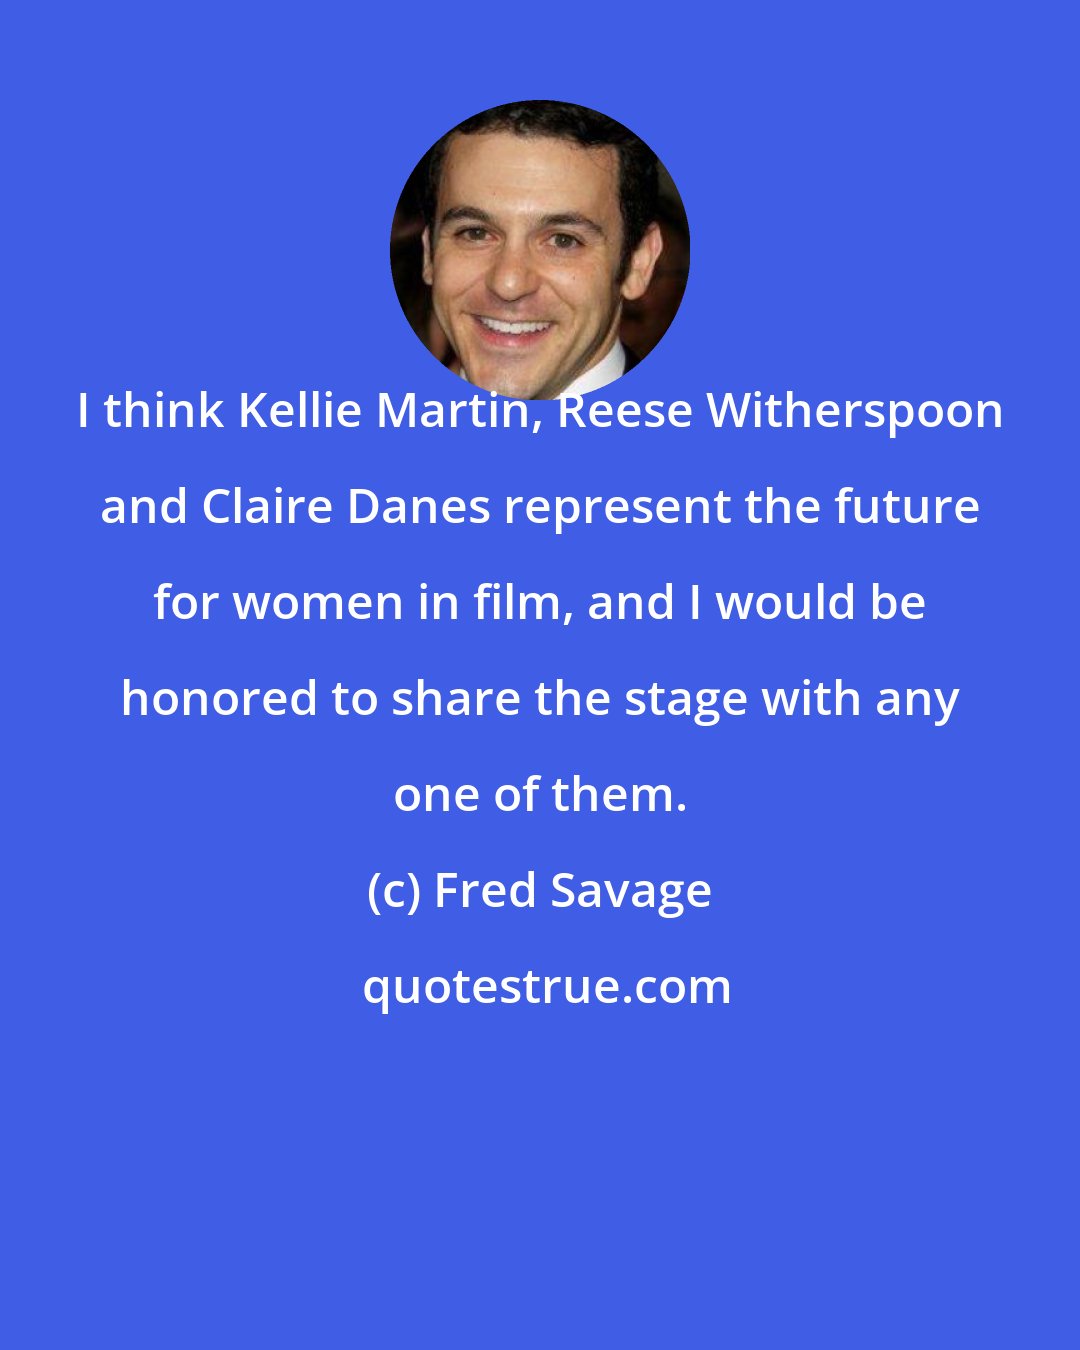 Fred Savage: I think Kellie Martin, Reese Witherspoon and Claire Danes represent the future for women in film, and I would be honored to share the stage with any one of them.